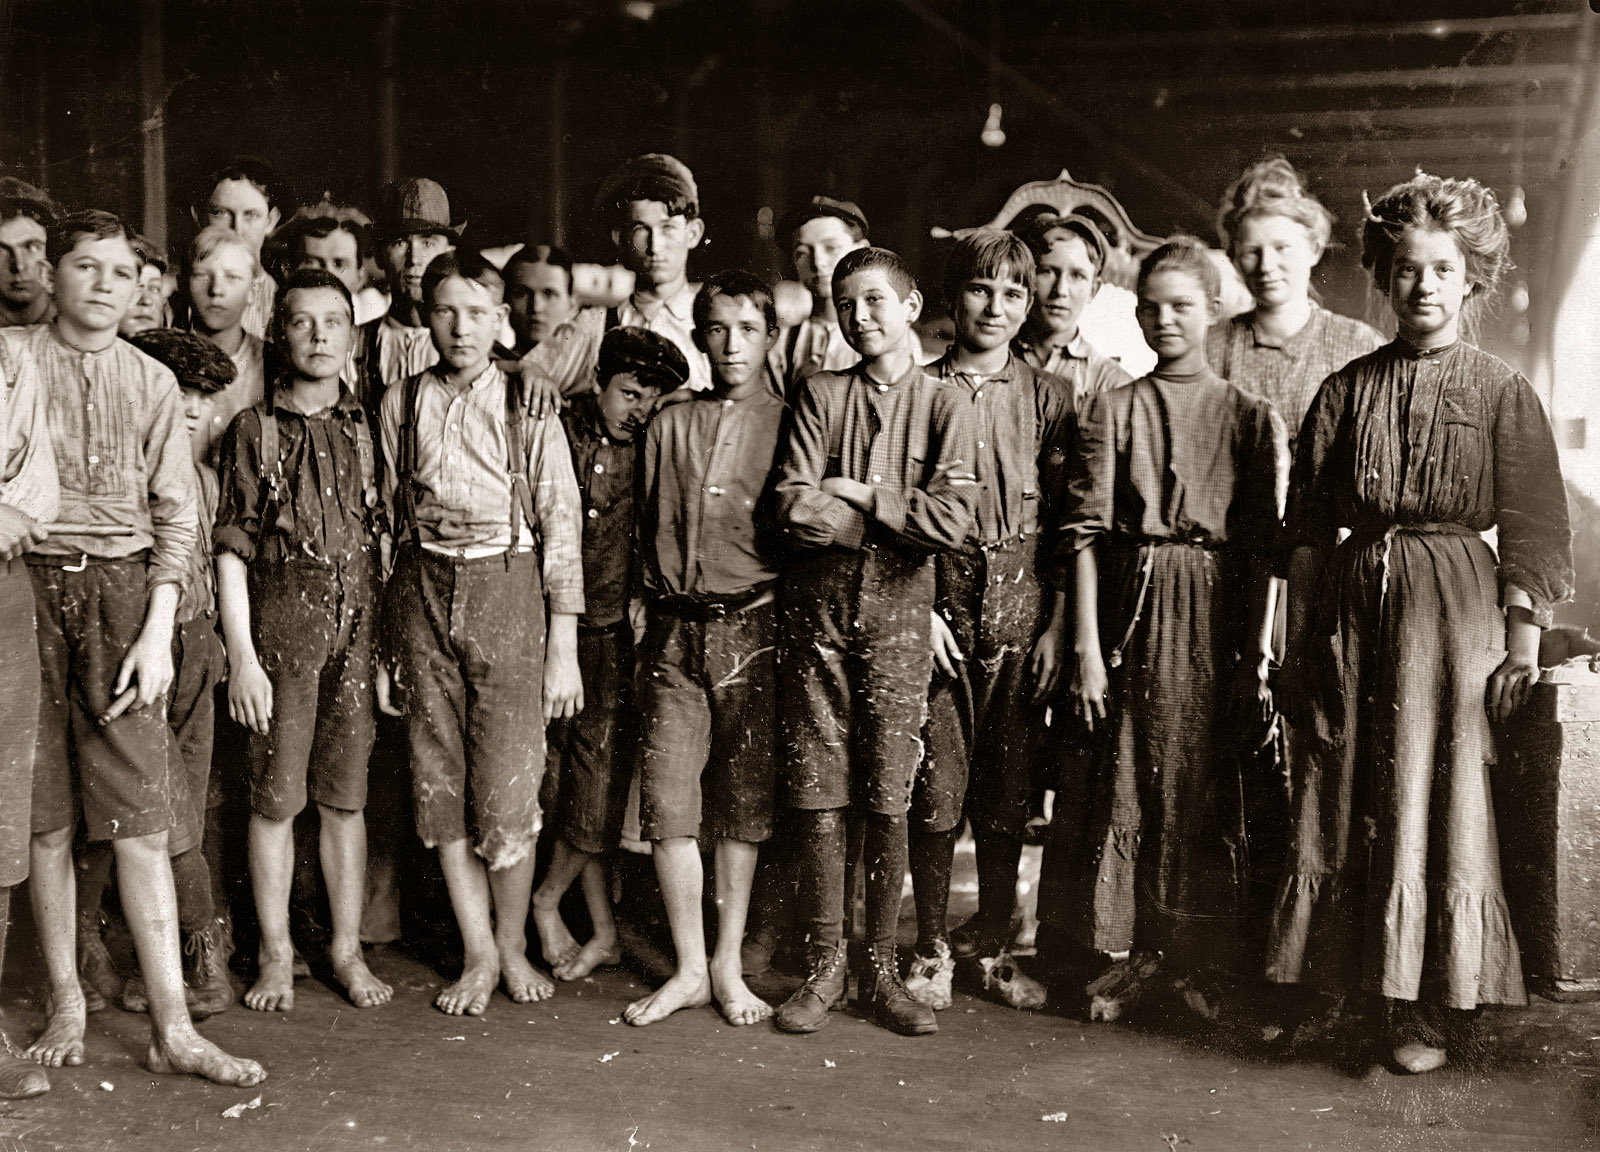 January 1909. Augusta, Georgia. "Noon Hour. Workers in Enterprise Cotton Mill. The wheels are kept running through noon hour (which is only 40 minutes) so employees may be tempted to put in part of this time at machine if they wish." Photograph and caption by Lewis Wickes Hine. View full size.